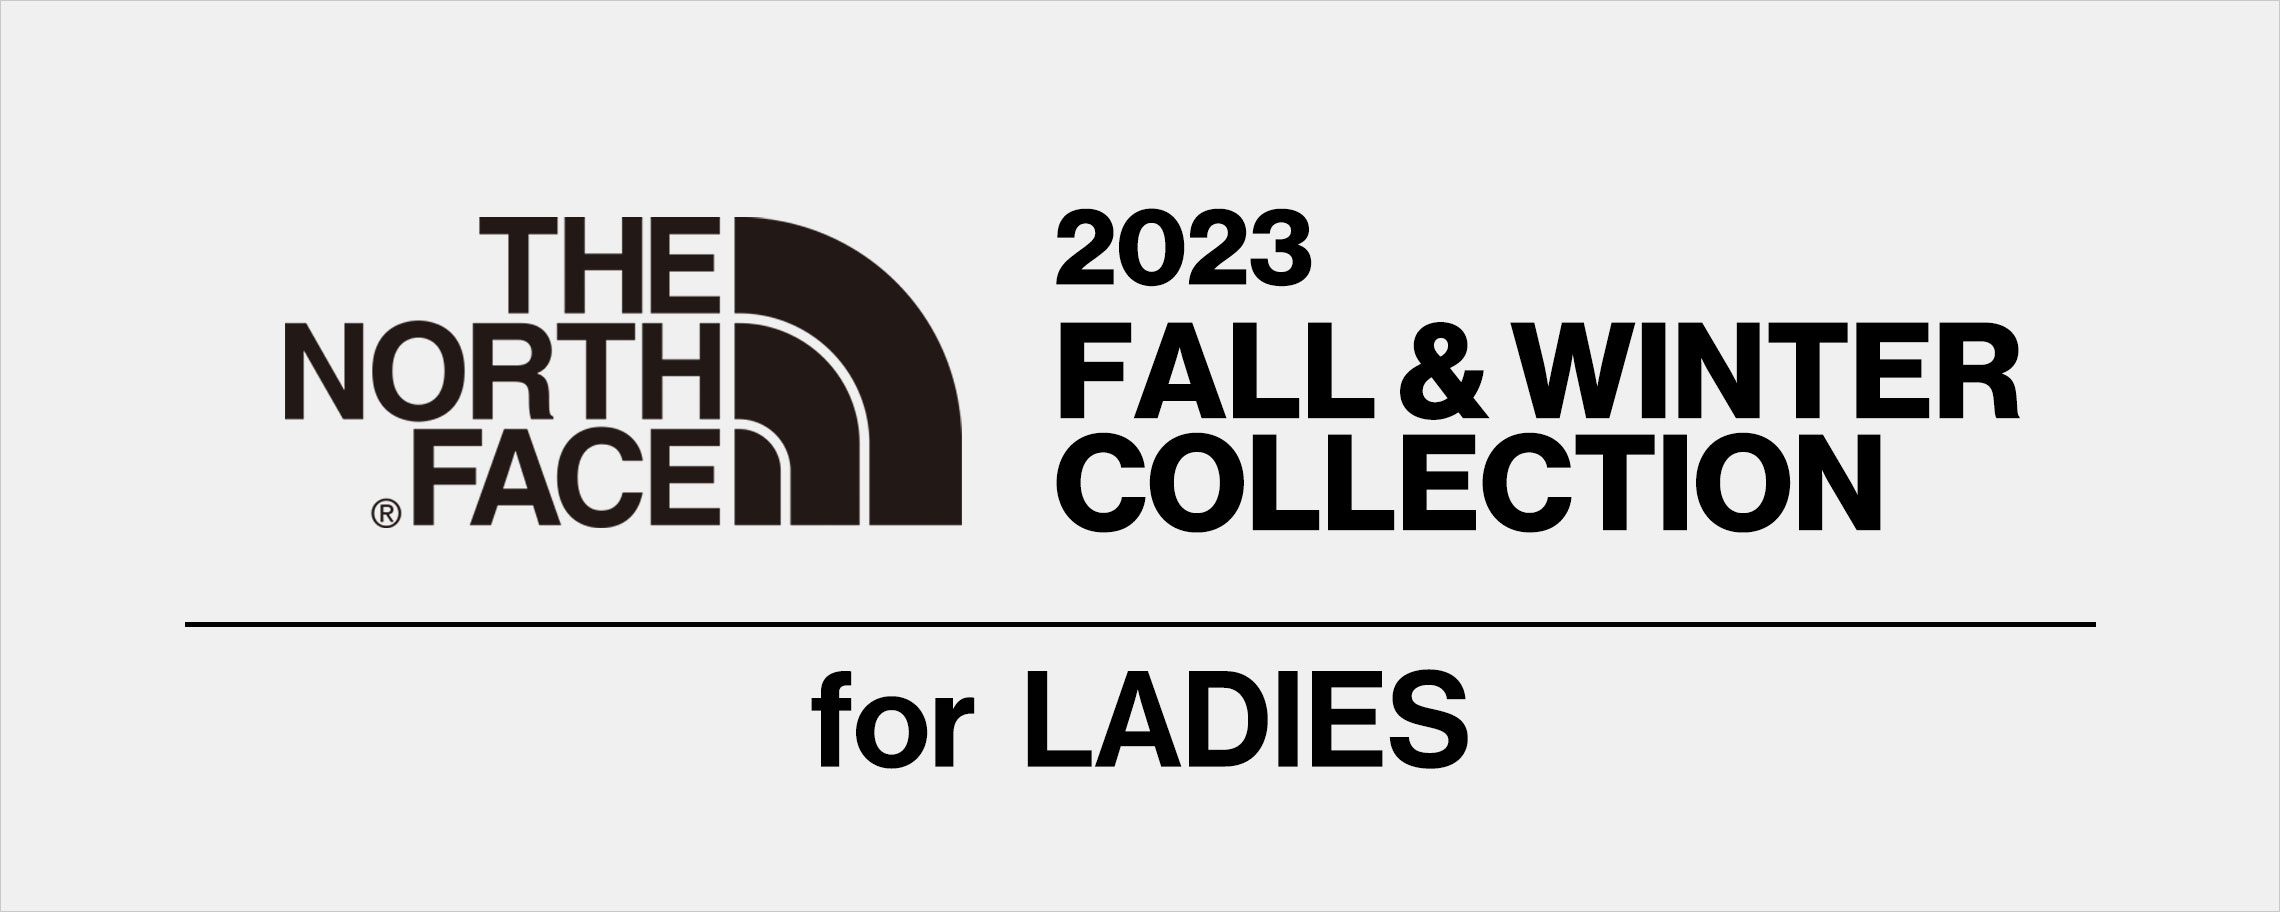 THE NORTH FACE FALL & WINTER for LADIES